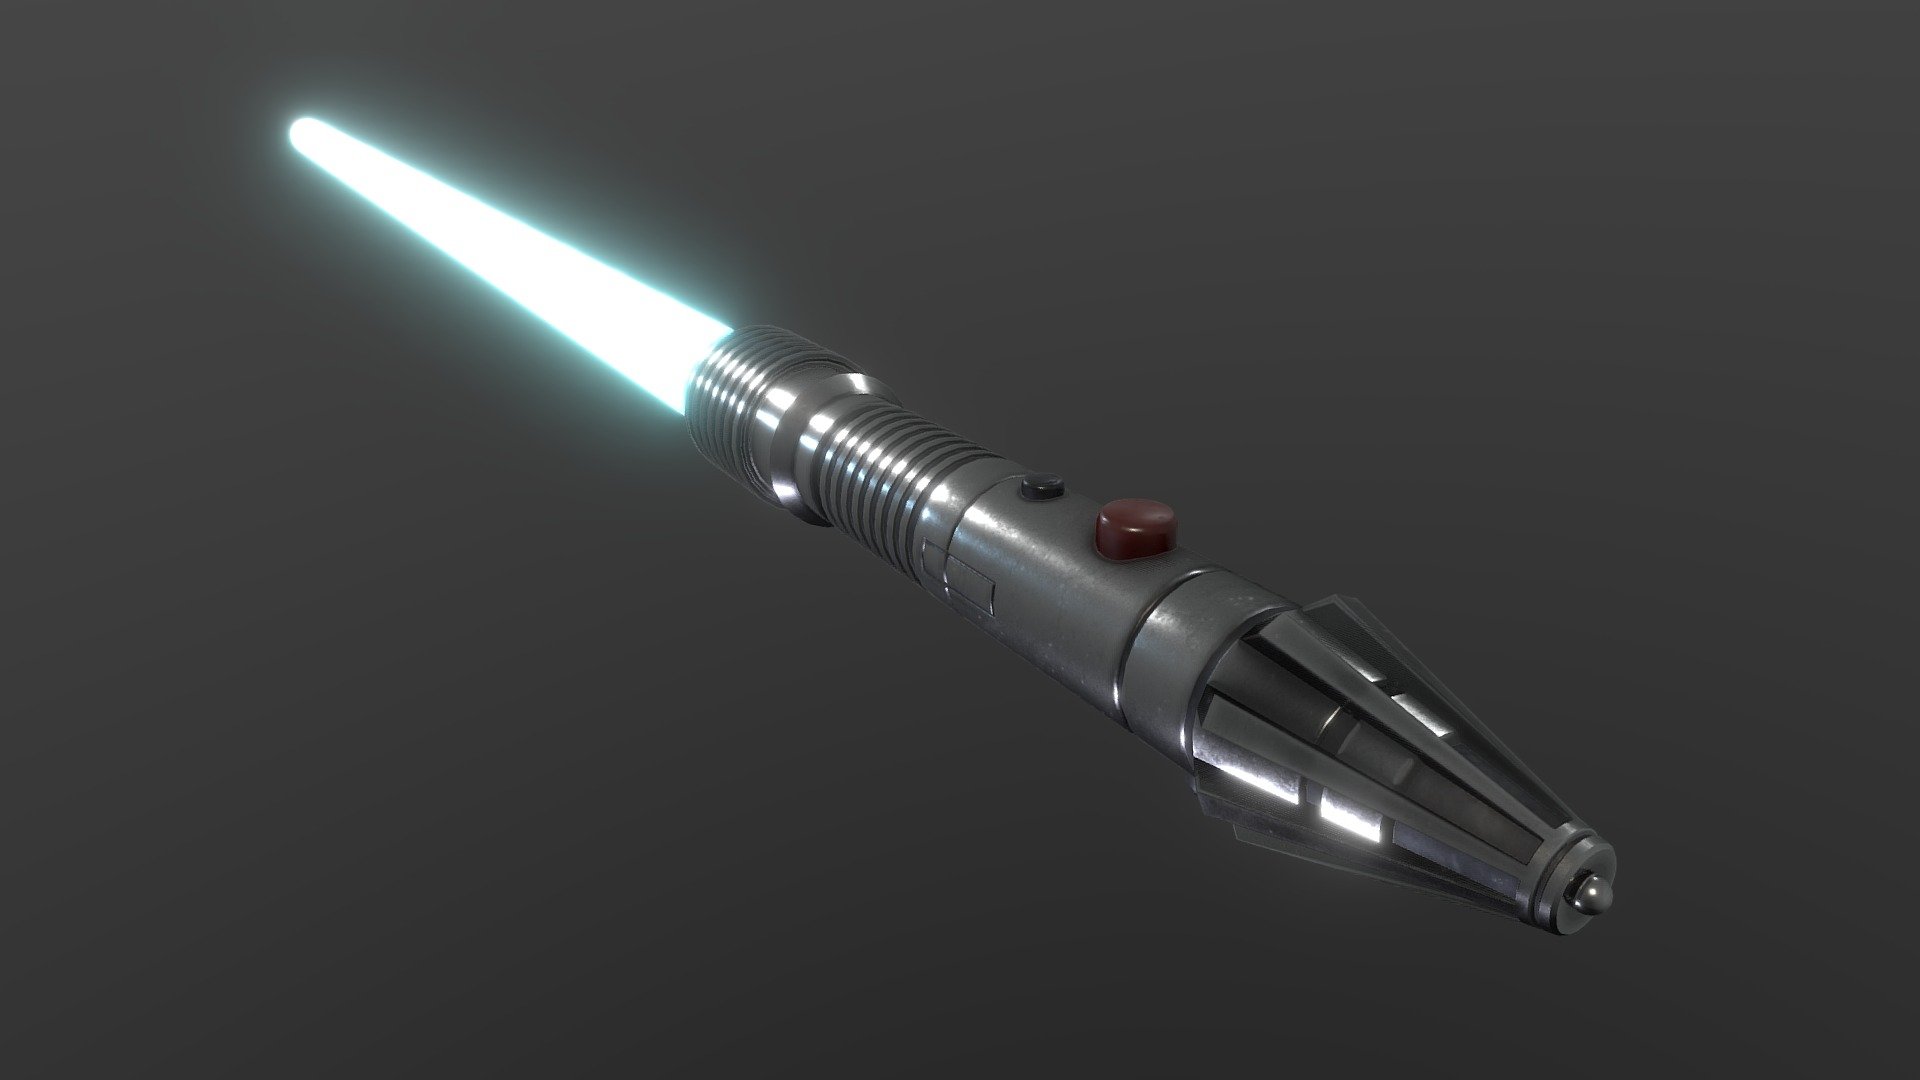 Jedi Master Plo Koon's Lightsaber from Star wars.

Modeled in Maya and textured in Substance Painter 3D

feel free to download and leave feedback - Plo Koon's Lightsaber - Download Free 3D model by chrlog 3d model